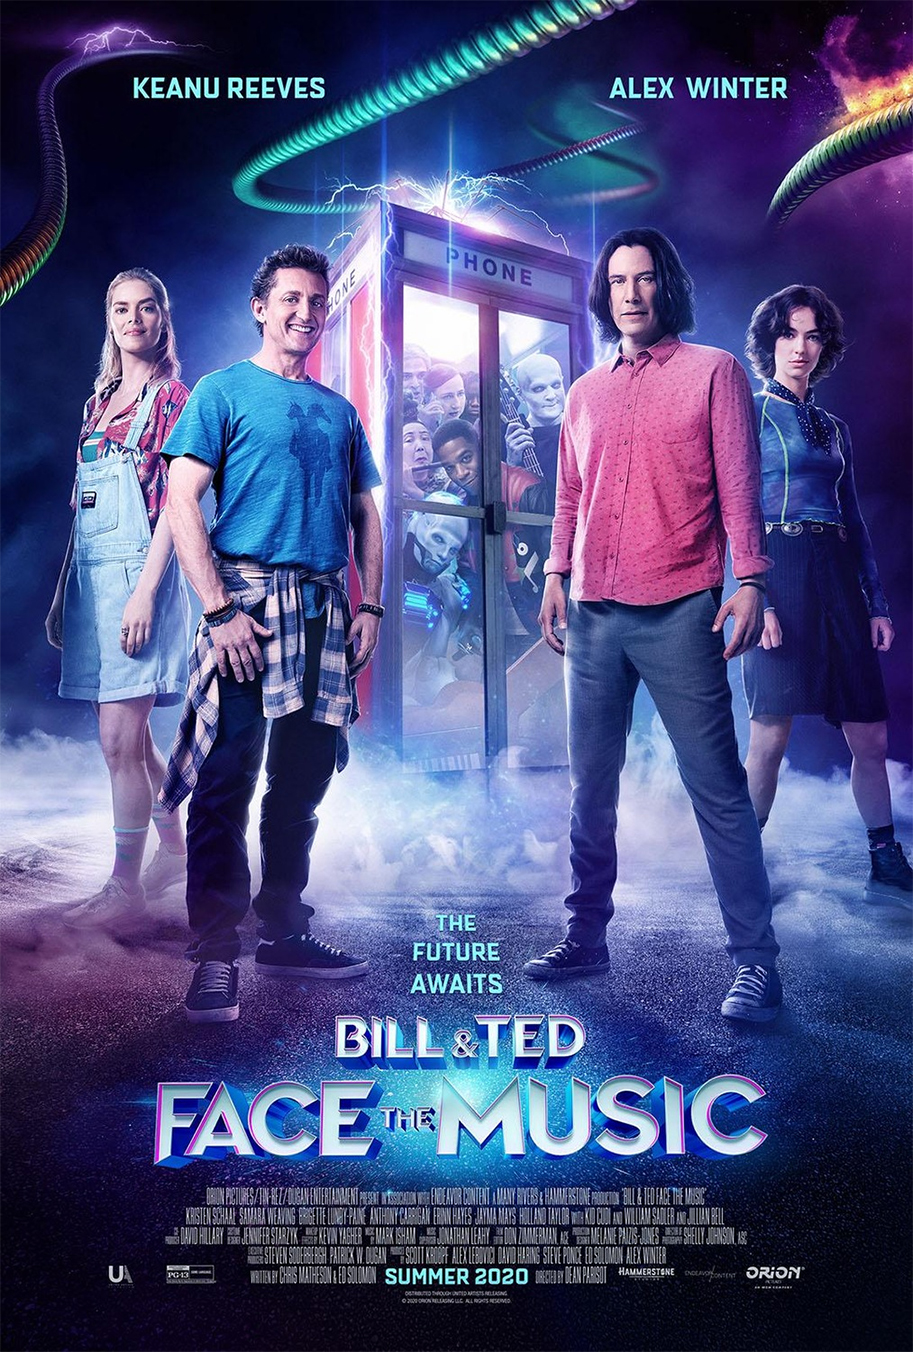 Bill & Ted Face the Music, Keanu Reeves, Alex Winter, poster